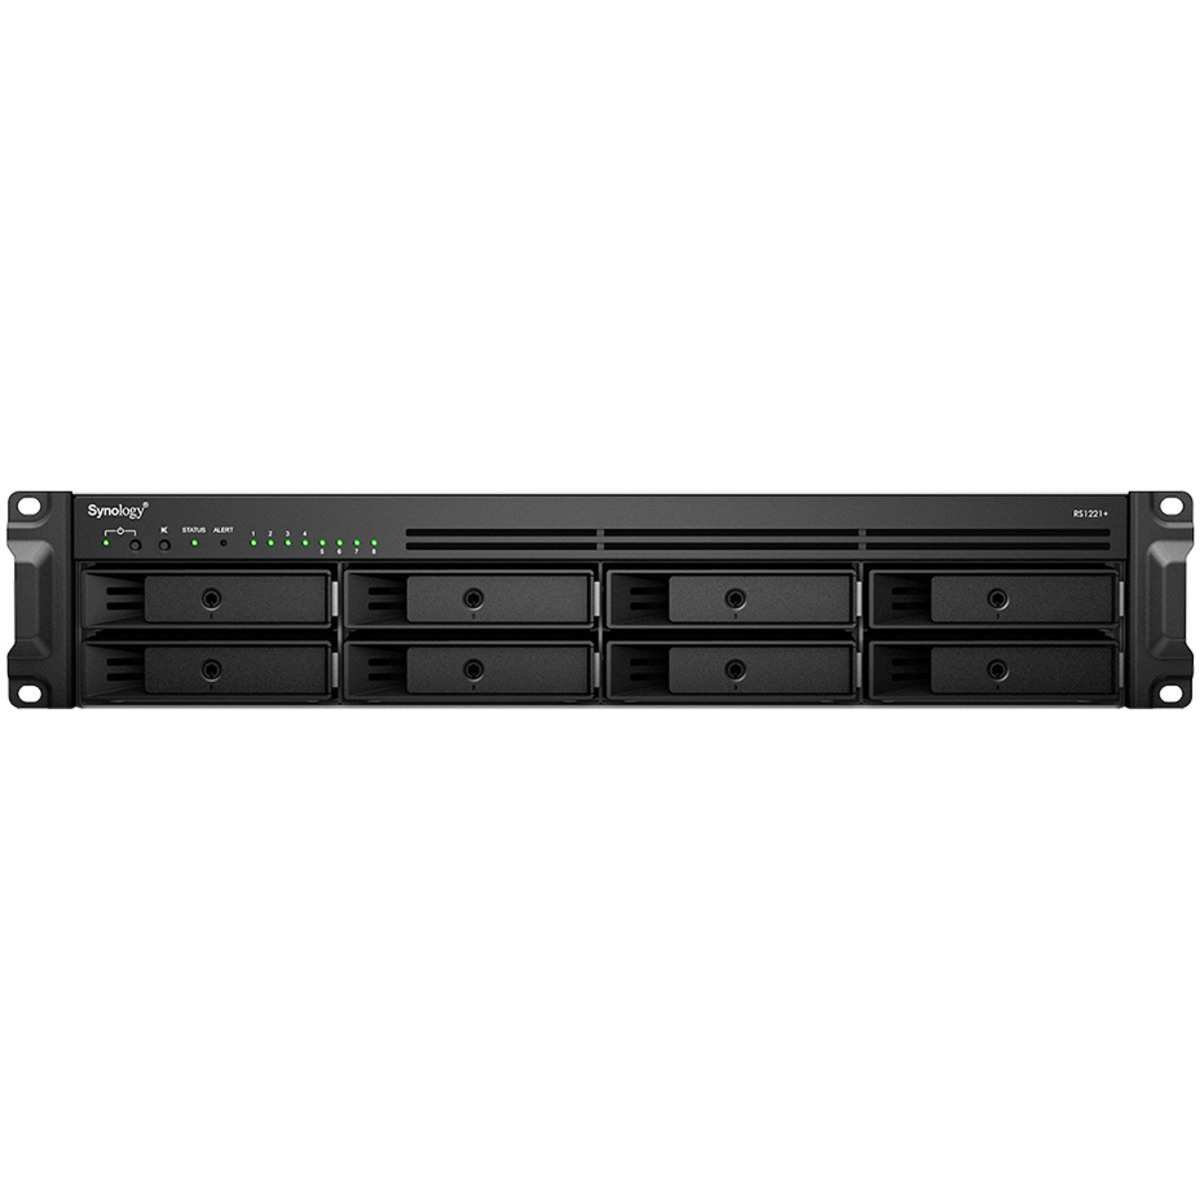 Synology RackStation RS1221RP+ 24tb 8-Bay RackMount Multimedia / Power User / Business NAS - Network Attached Storage Device 6x4tb Seagate BarraCuda ST4000DM004 3.5 7200rpm SATA 6Gb/s HDD CONSUMER Class Drives Installed - Burn-In Tested - FREE RAM UPGRADE RackStation RS1221RP+